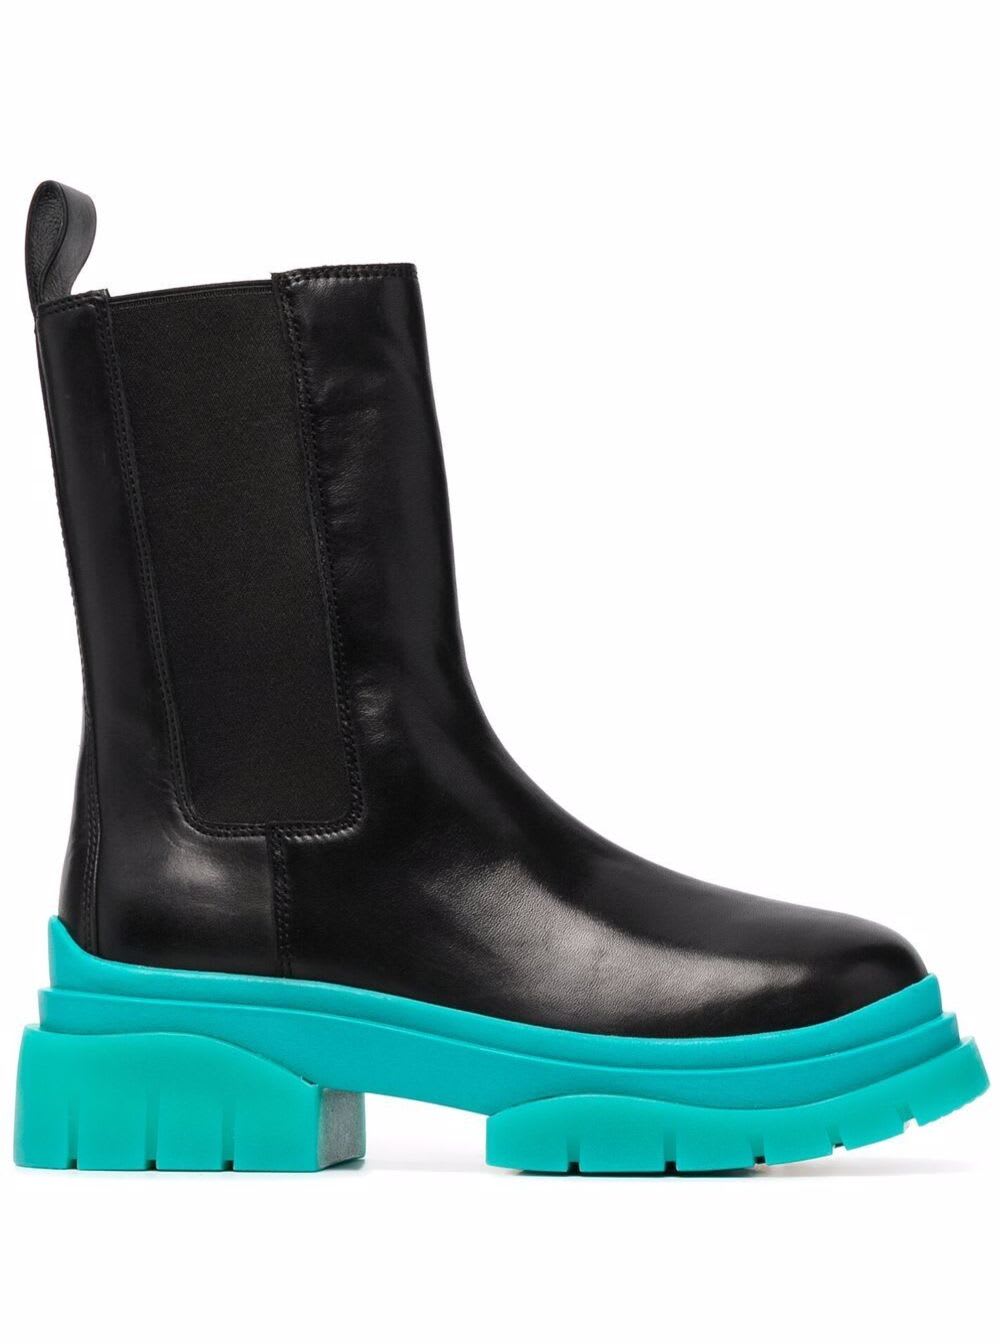 Ash Black Leather Boots With Light Blue Chunky Sole